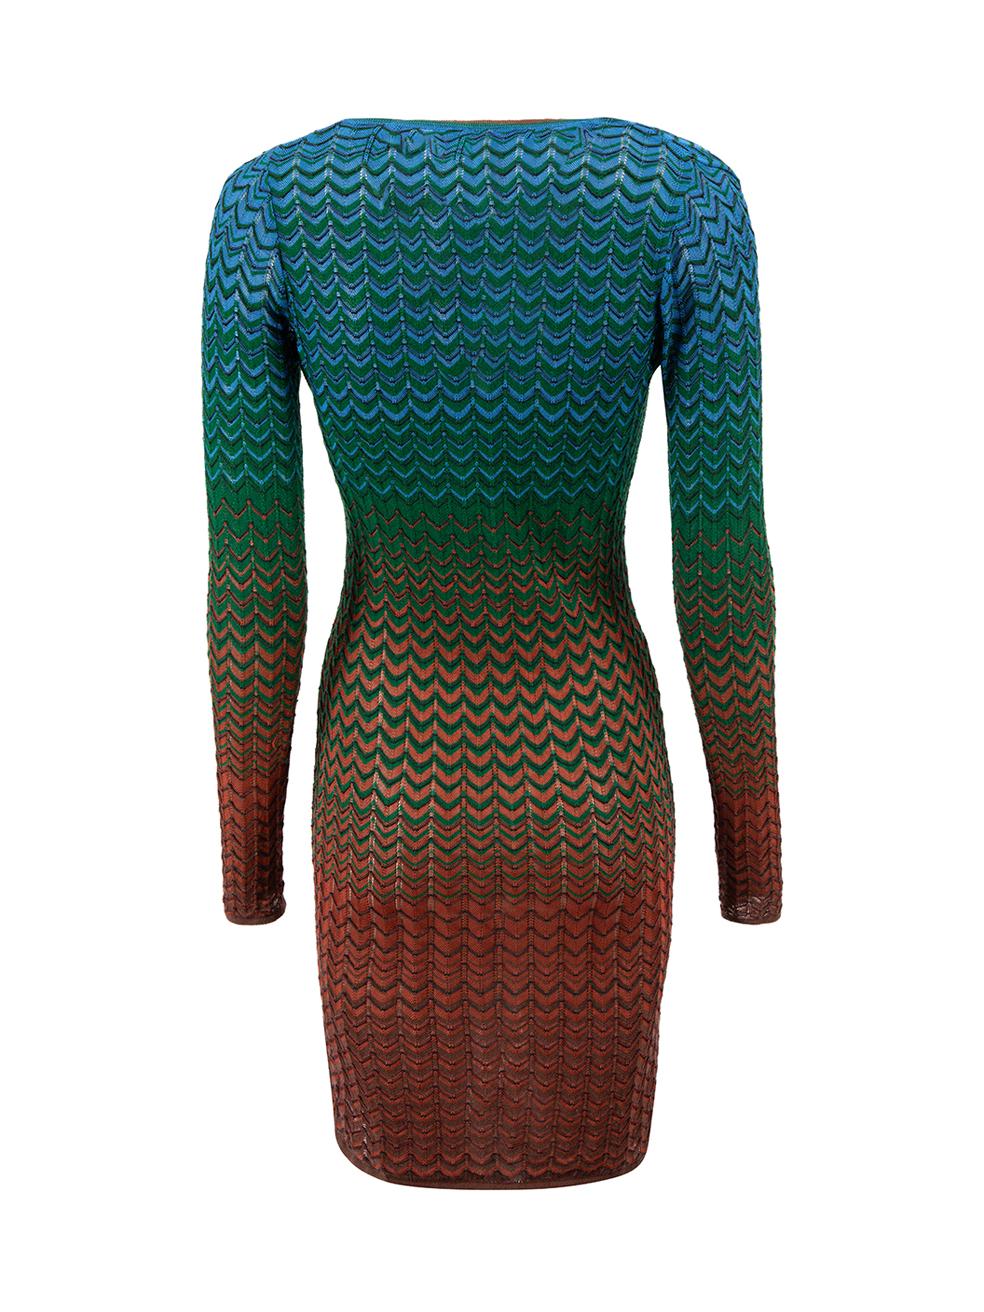 M Missoni Zigzag Knit V-Neck Dress Size S In Good Condition For Sale In London, GB